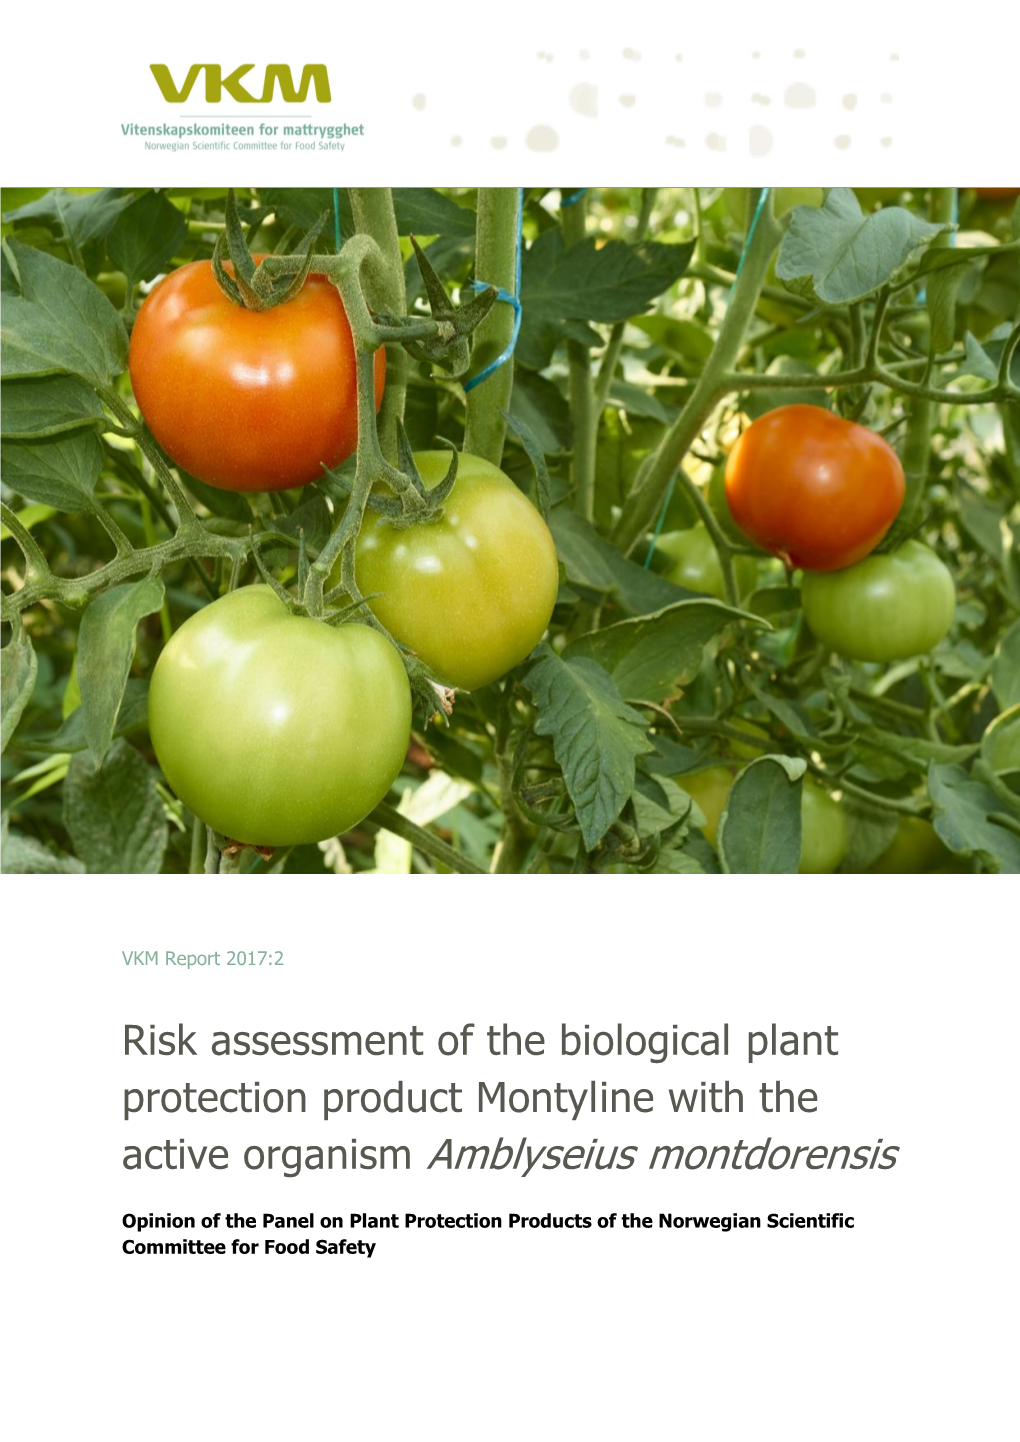 Risk Assessment of the Biological Plant Protection Product Montyline with the Active Organism Amblyseius Montdorensis